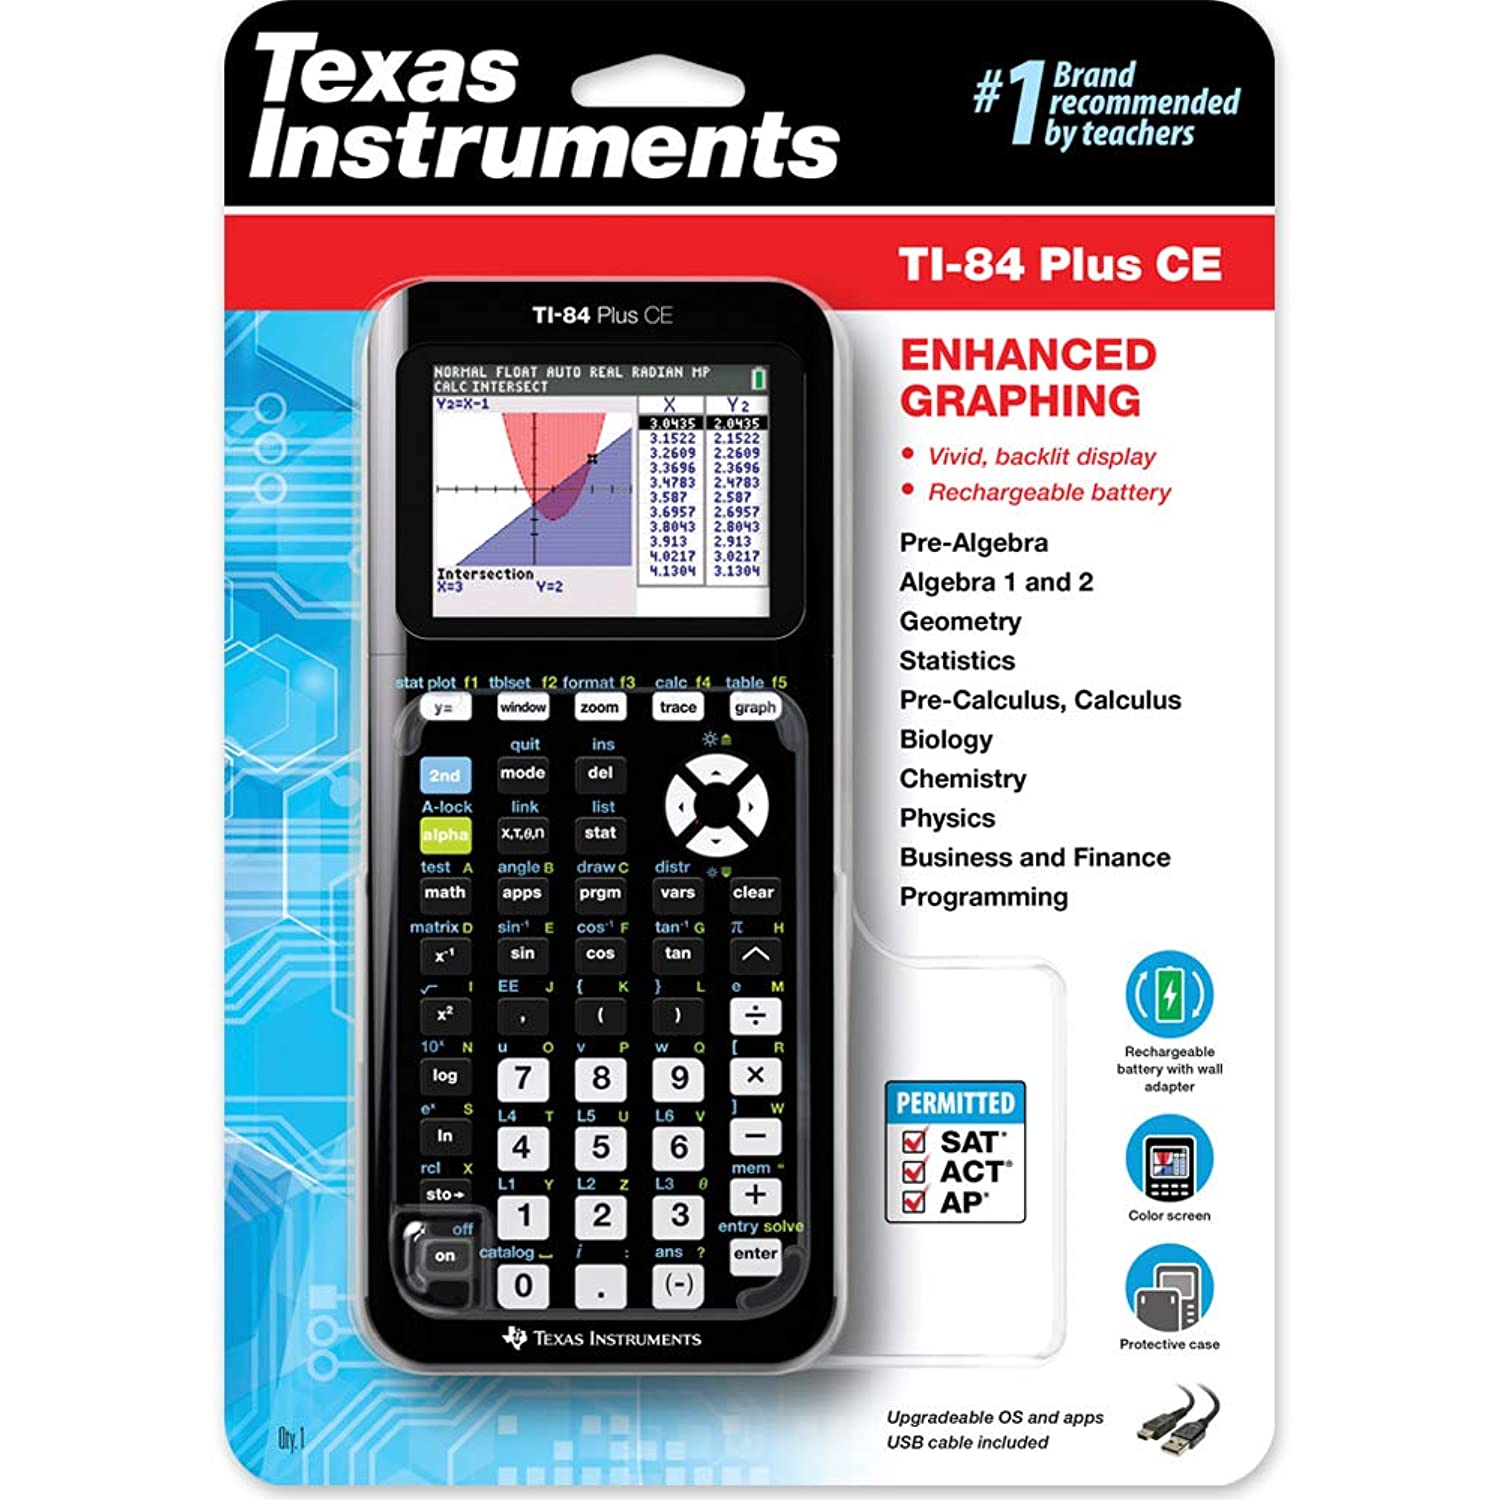 Texas Instruments TI-84 Plus CE Graphing Calculator, Black - image 5 of 5